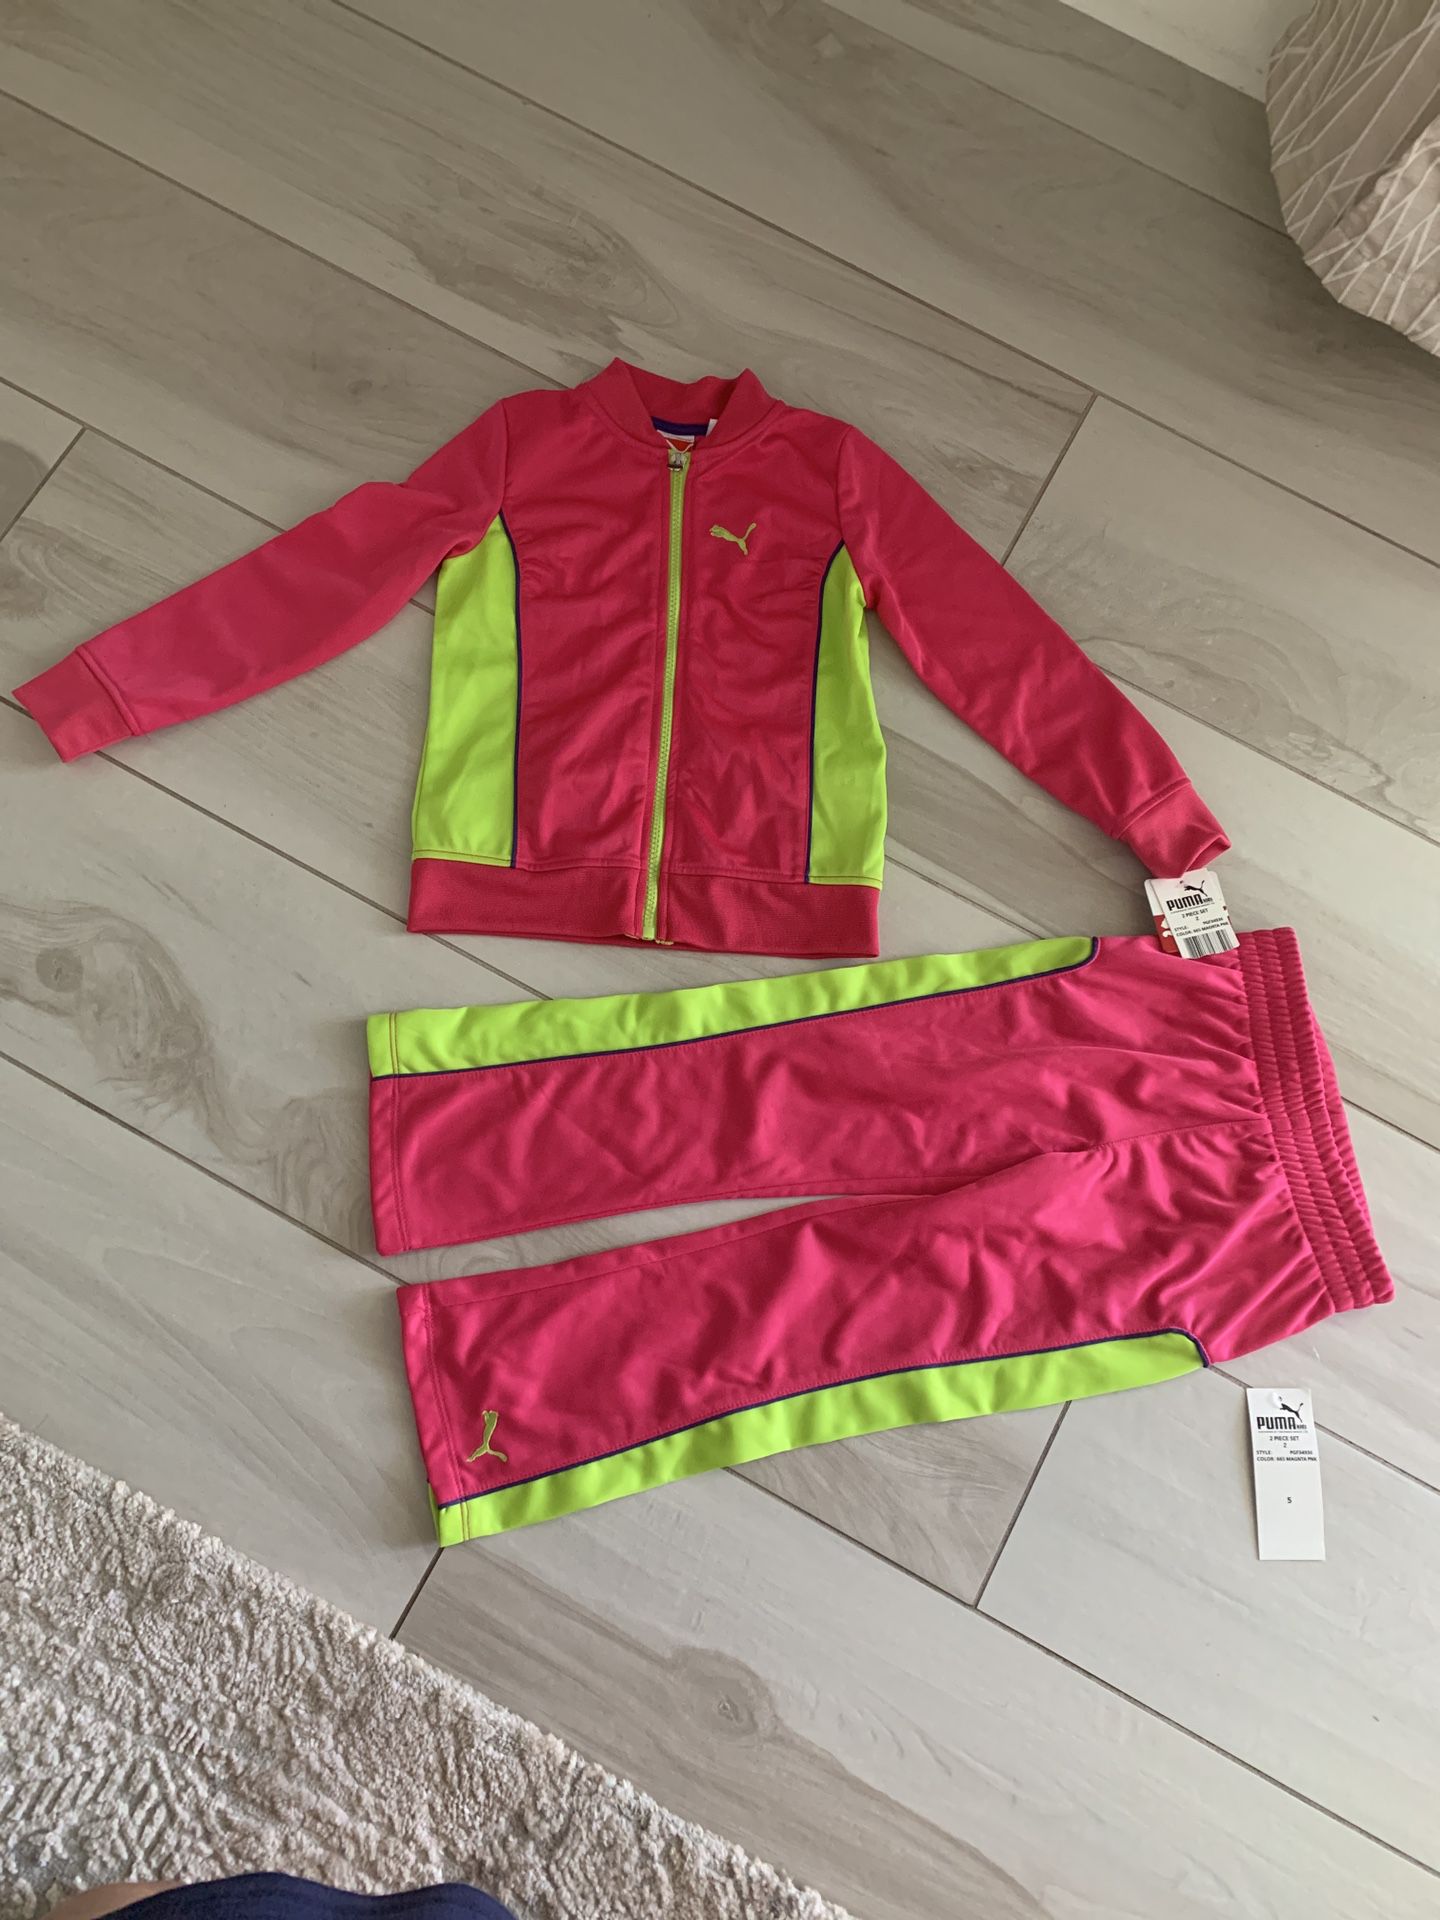 Girls Puma Jogger Track Suit Hot Pink Neon Green Set 5T Zip Up Jacket and Pants